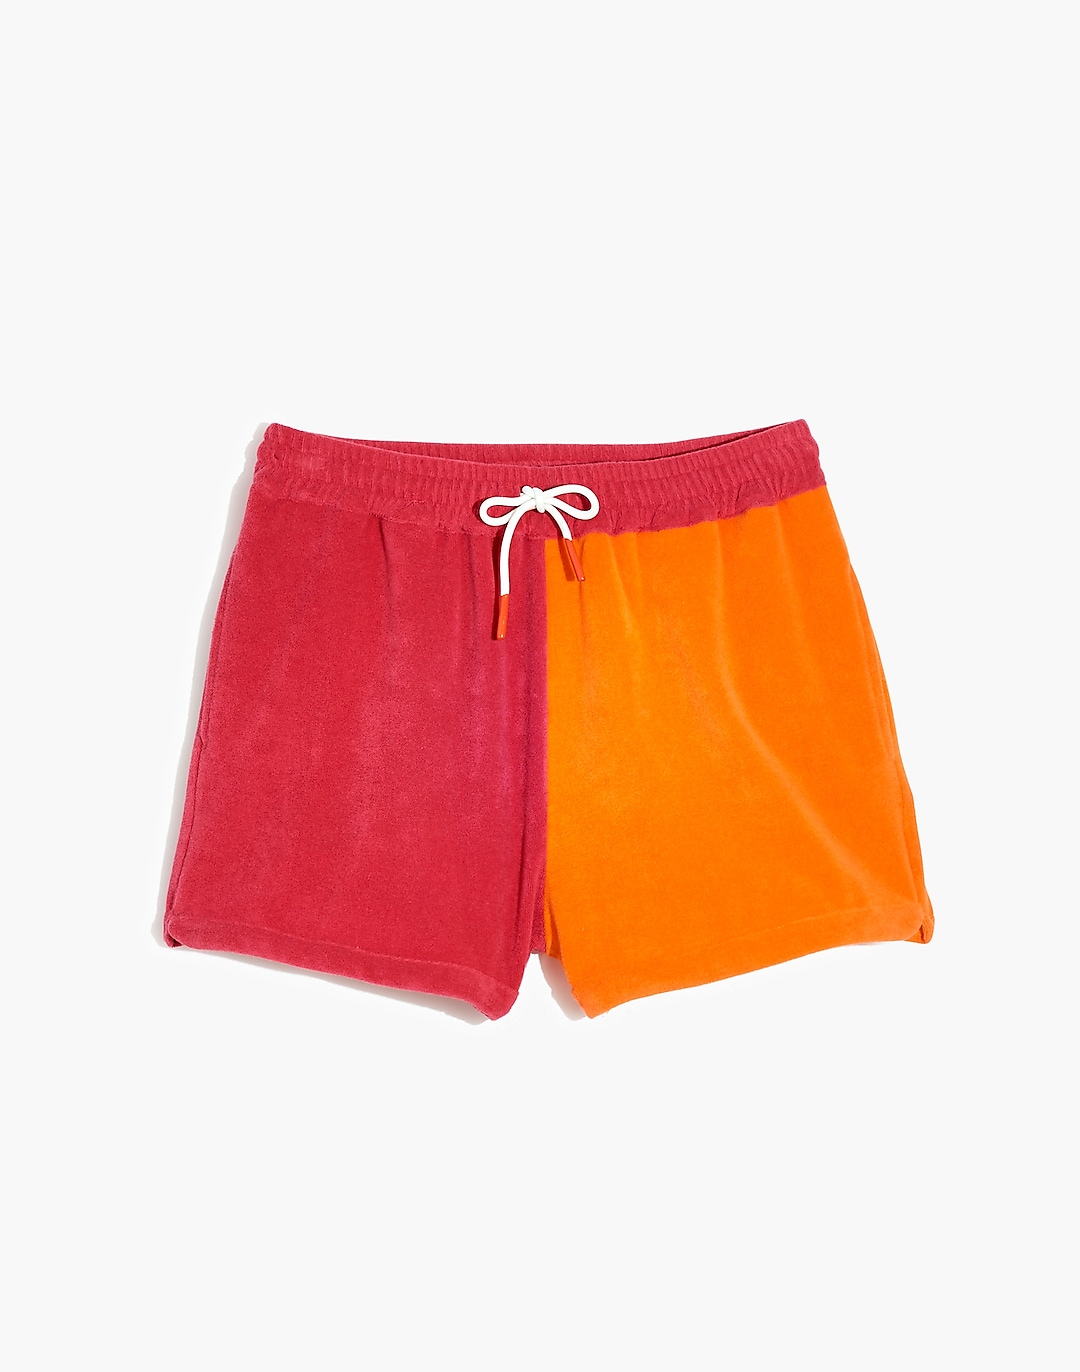 Solid & Striped® Colorblock Charlie Shorts